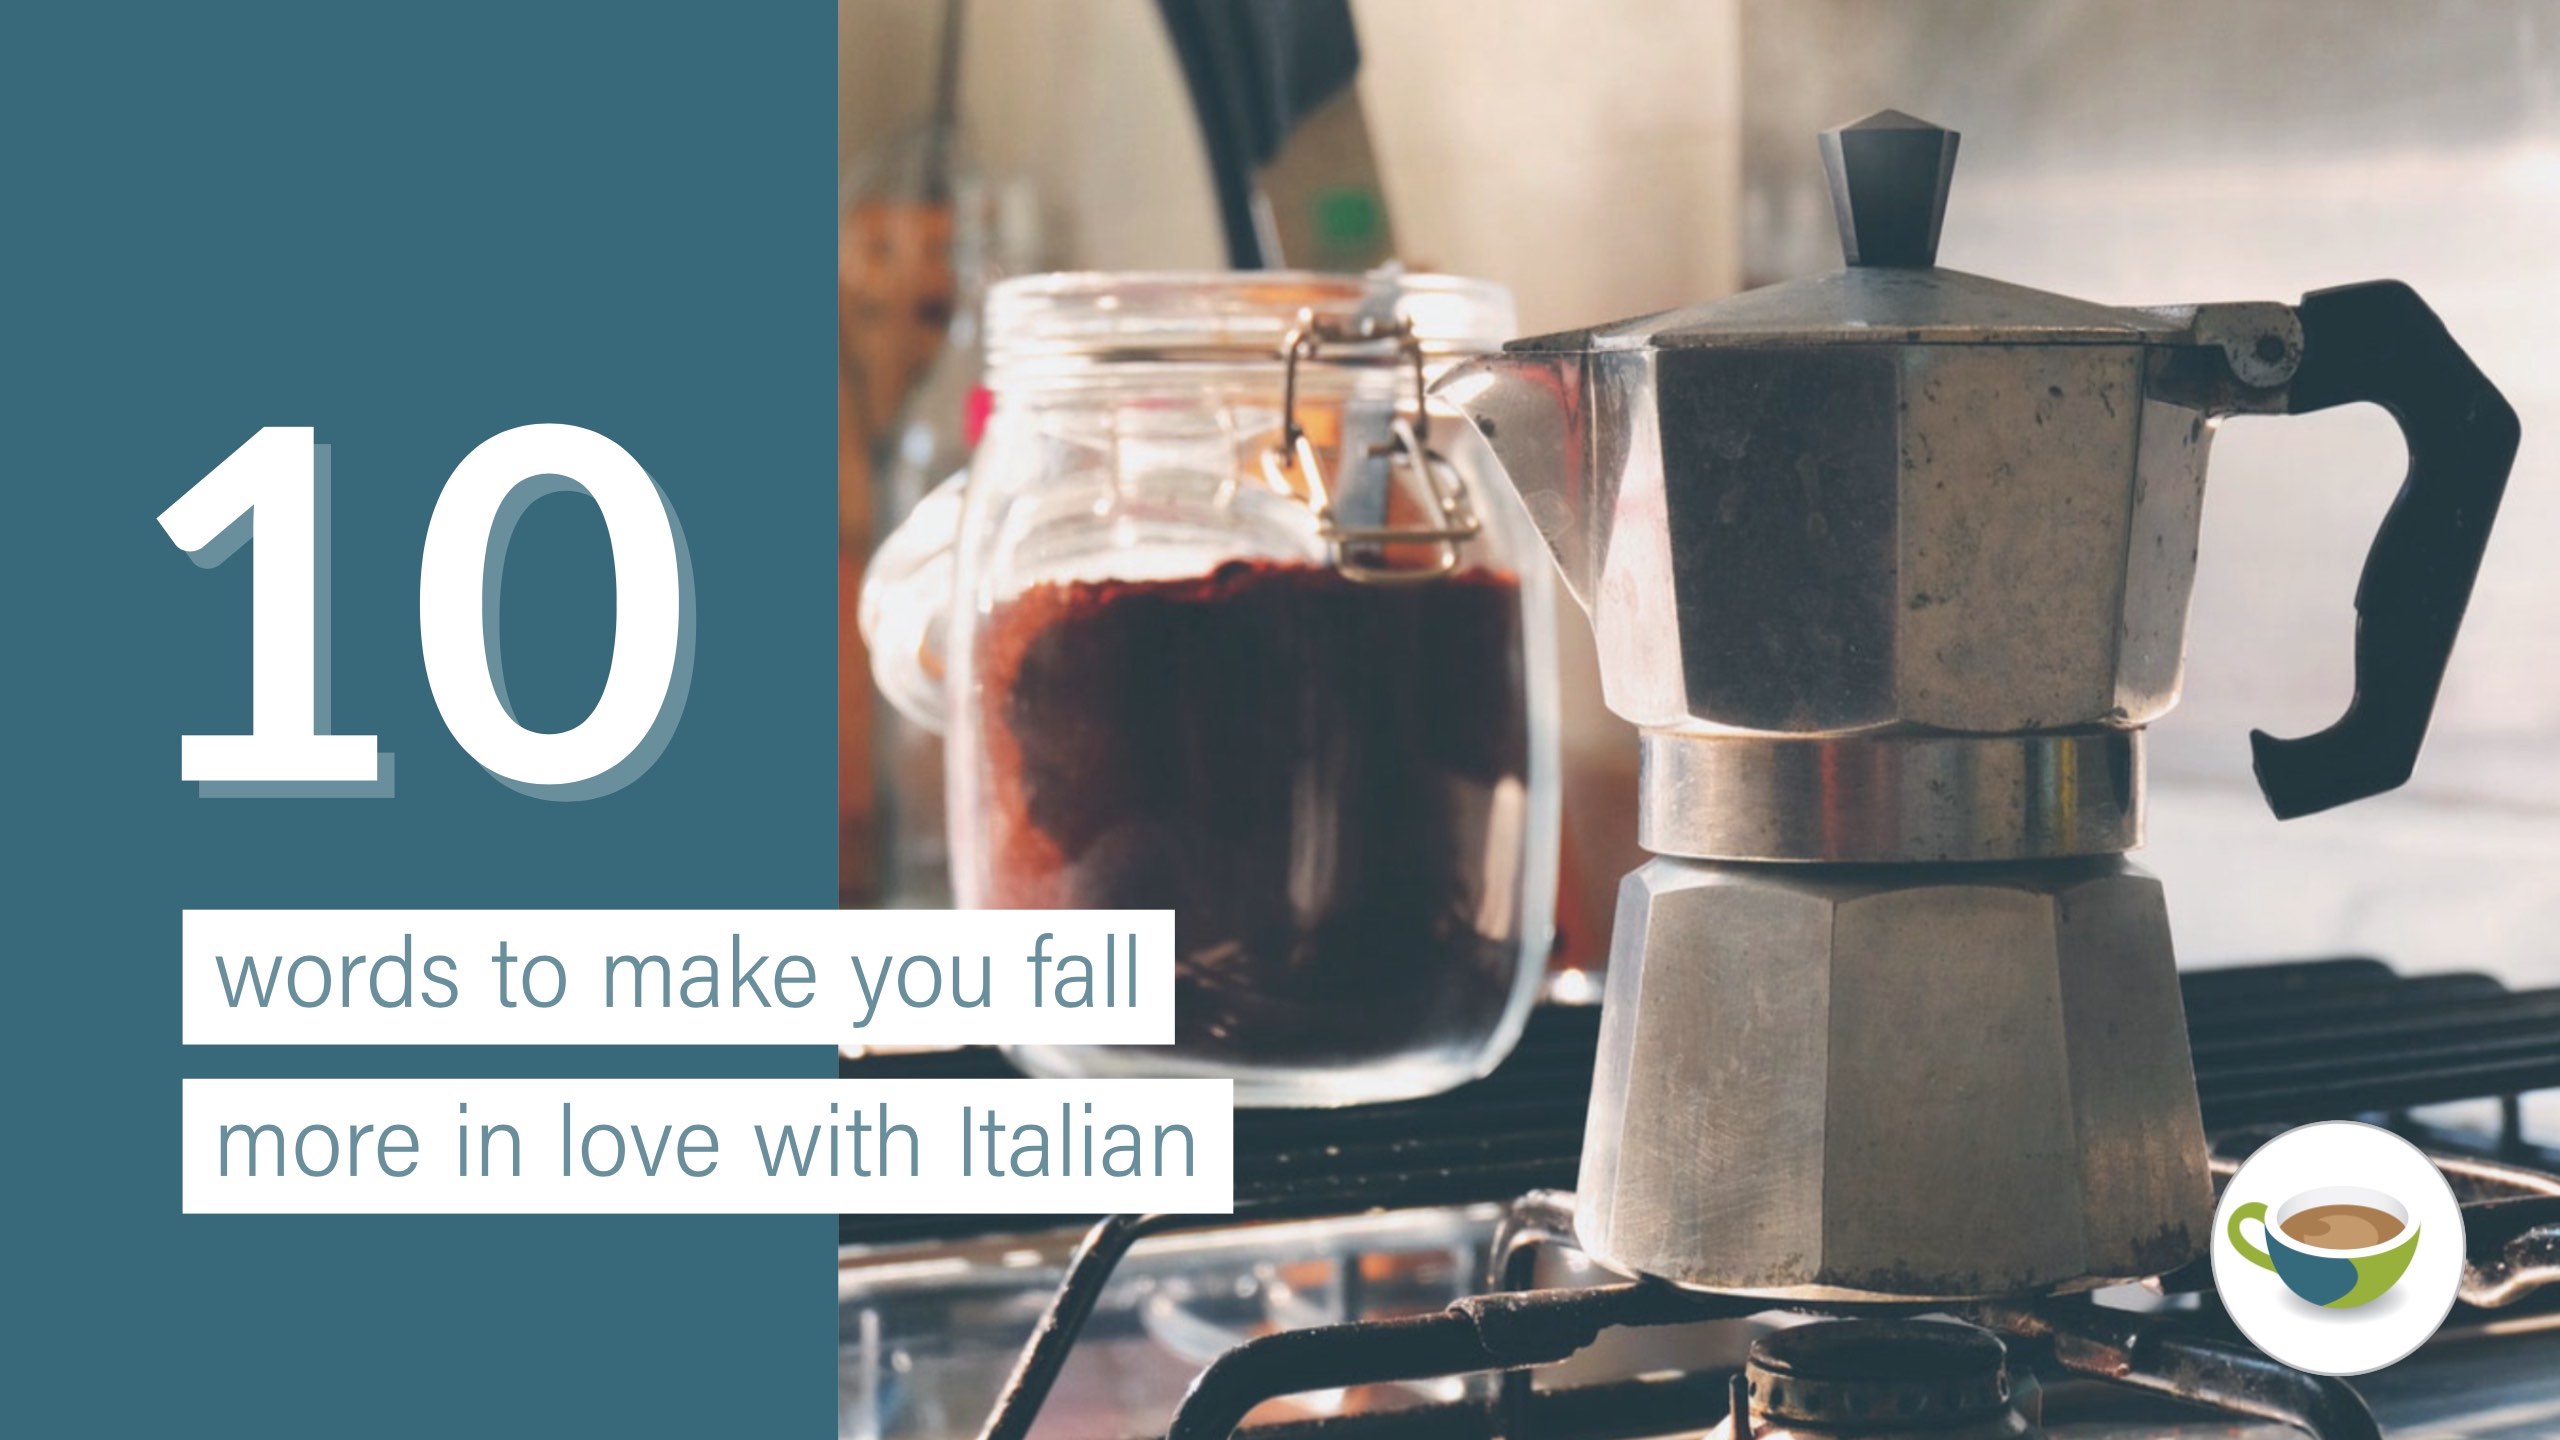 10 Italian words to make you fall more in love with Italian